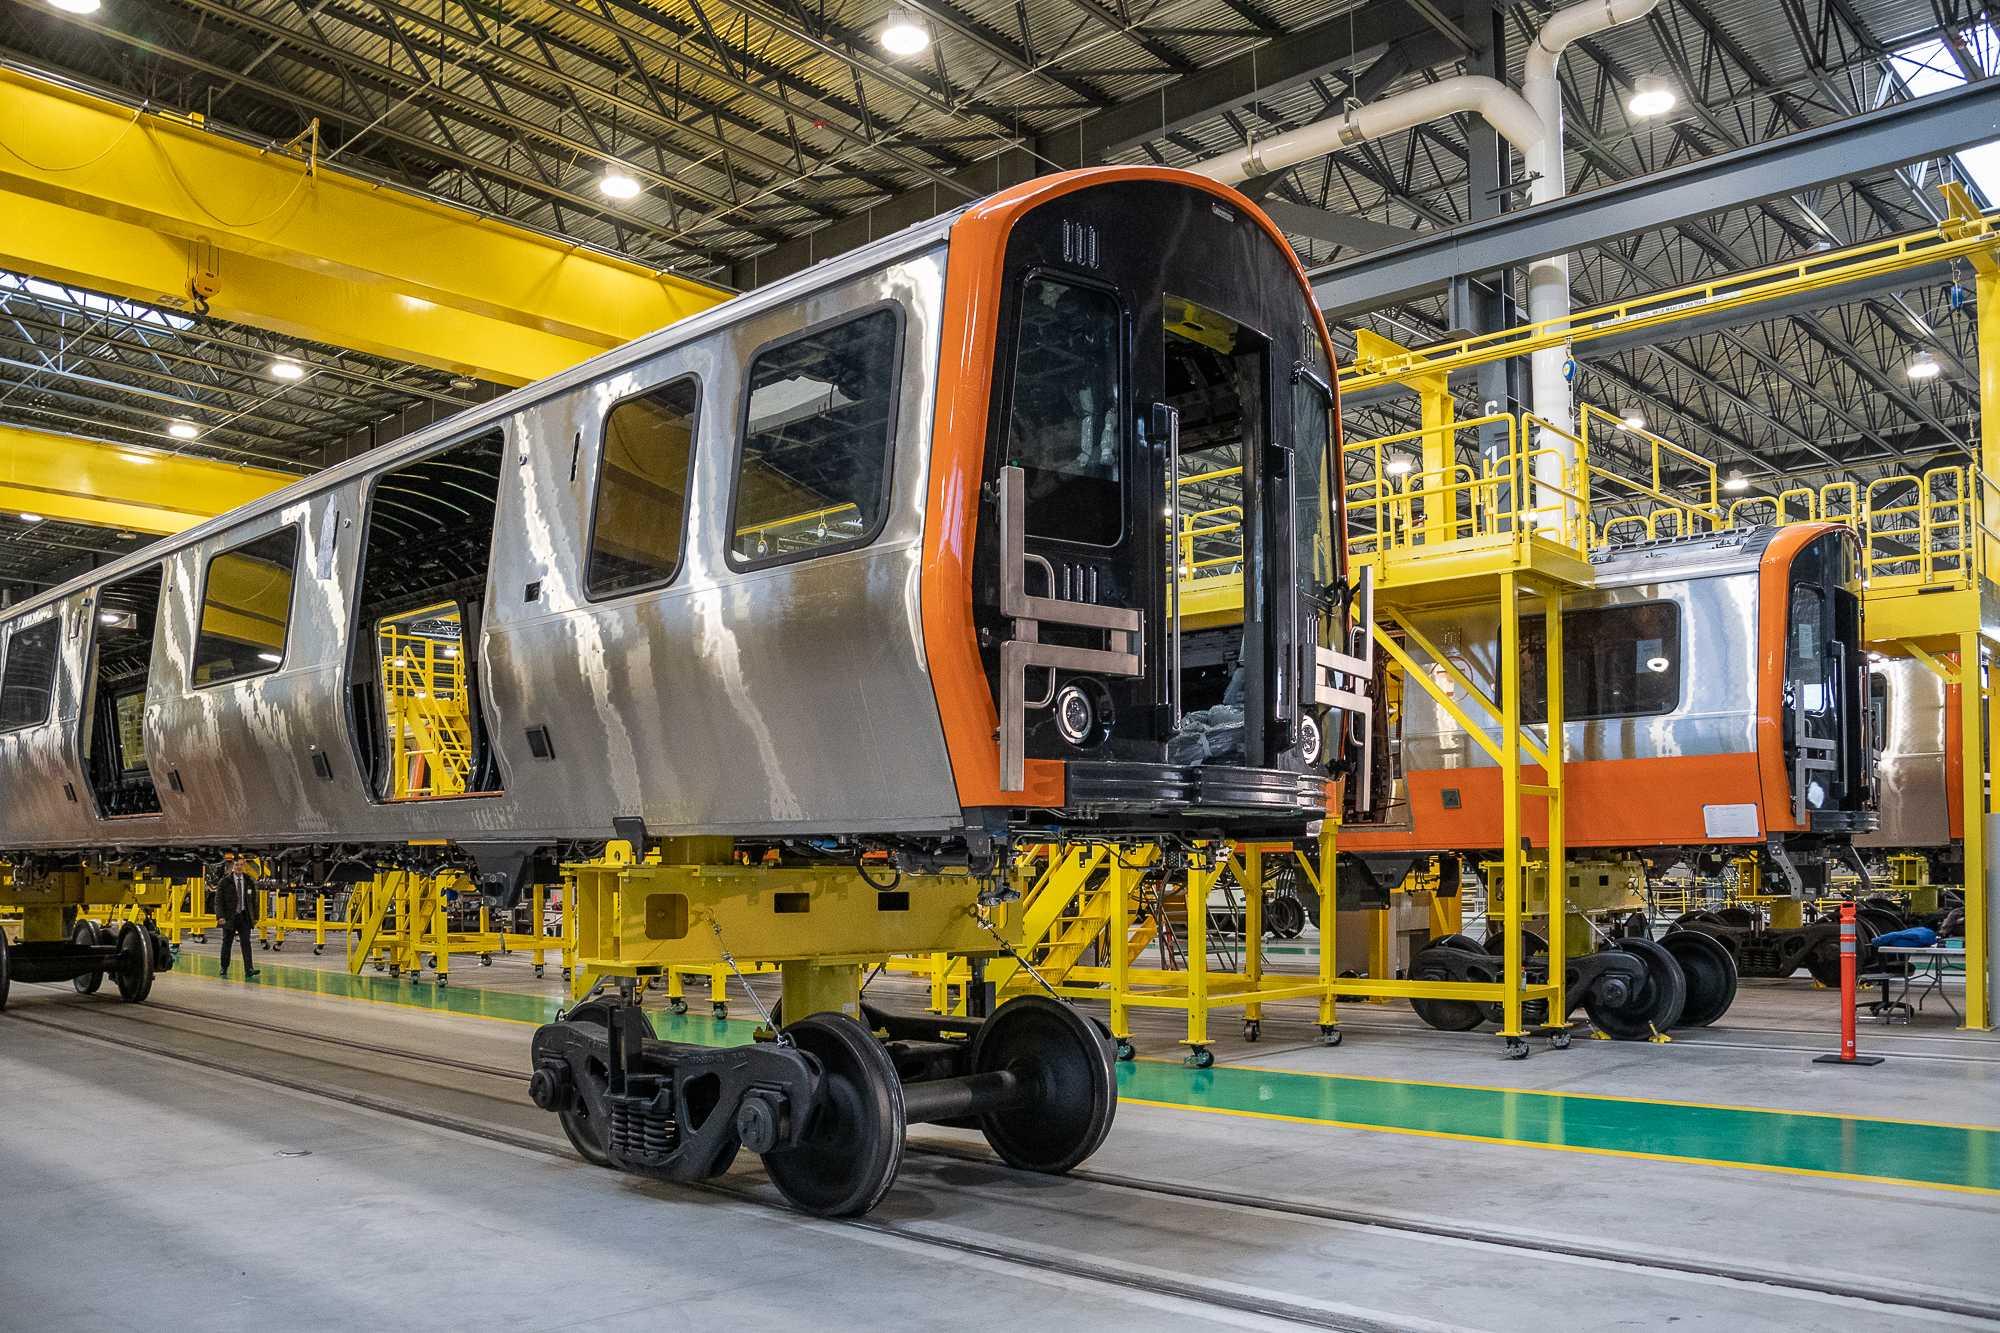 New Orange Line Car on a lift, separated from its wheels